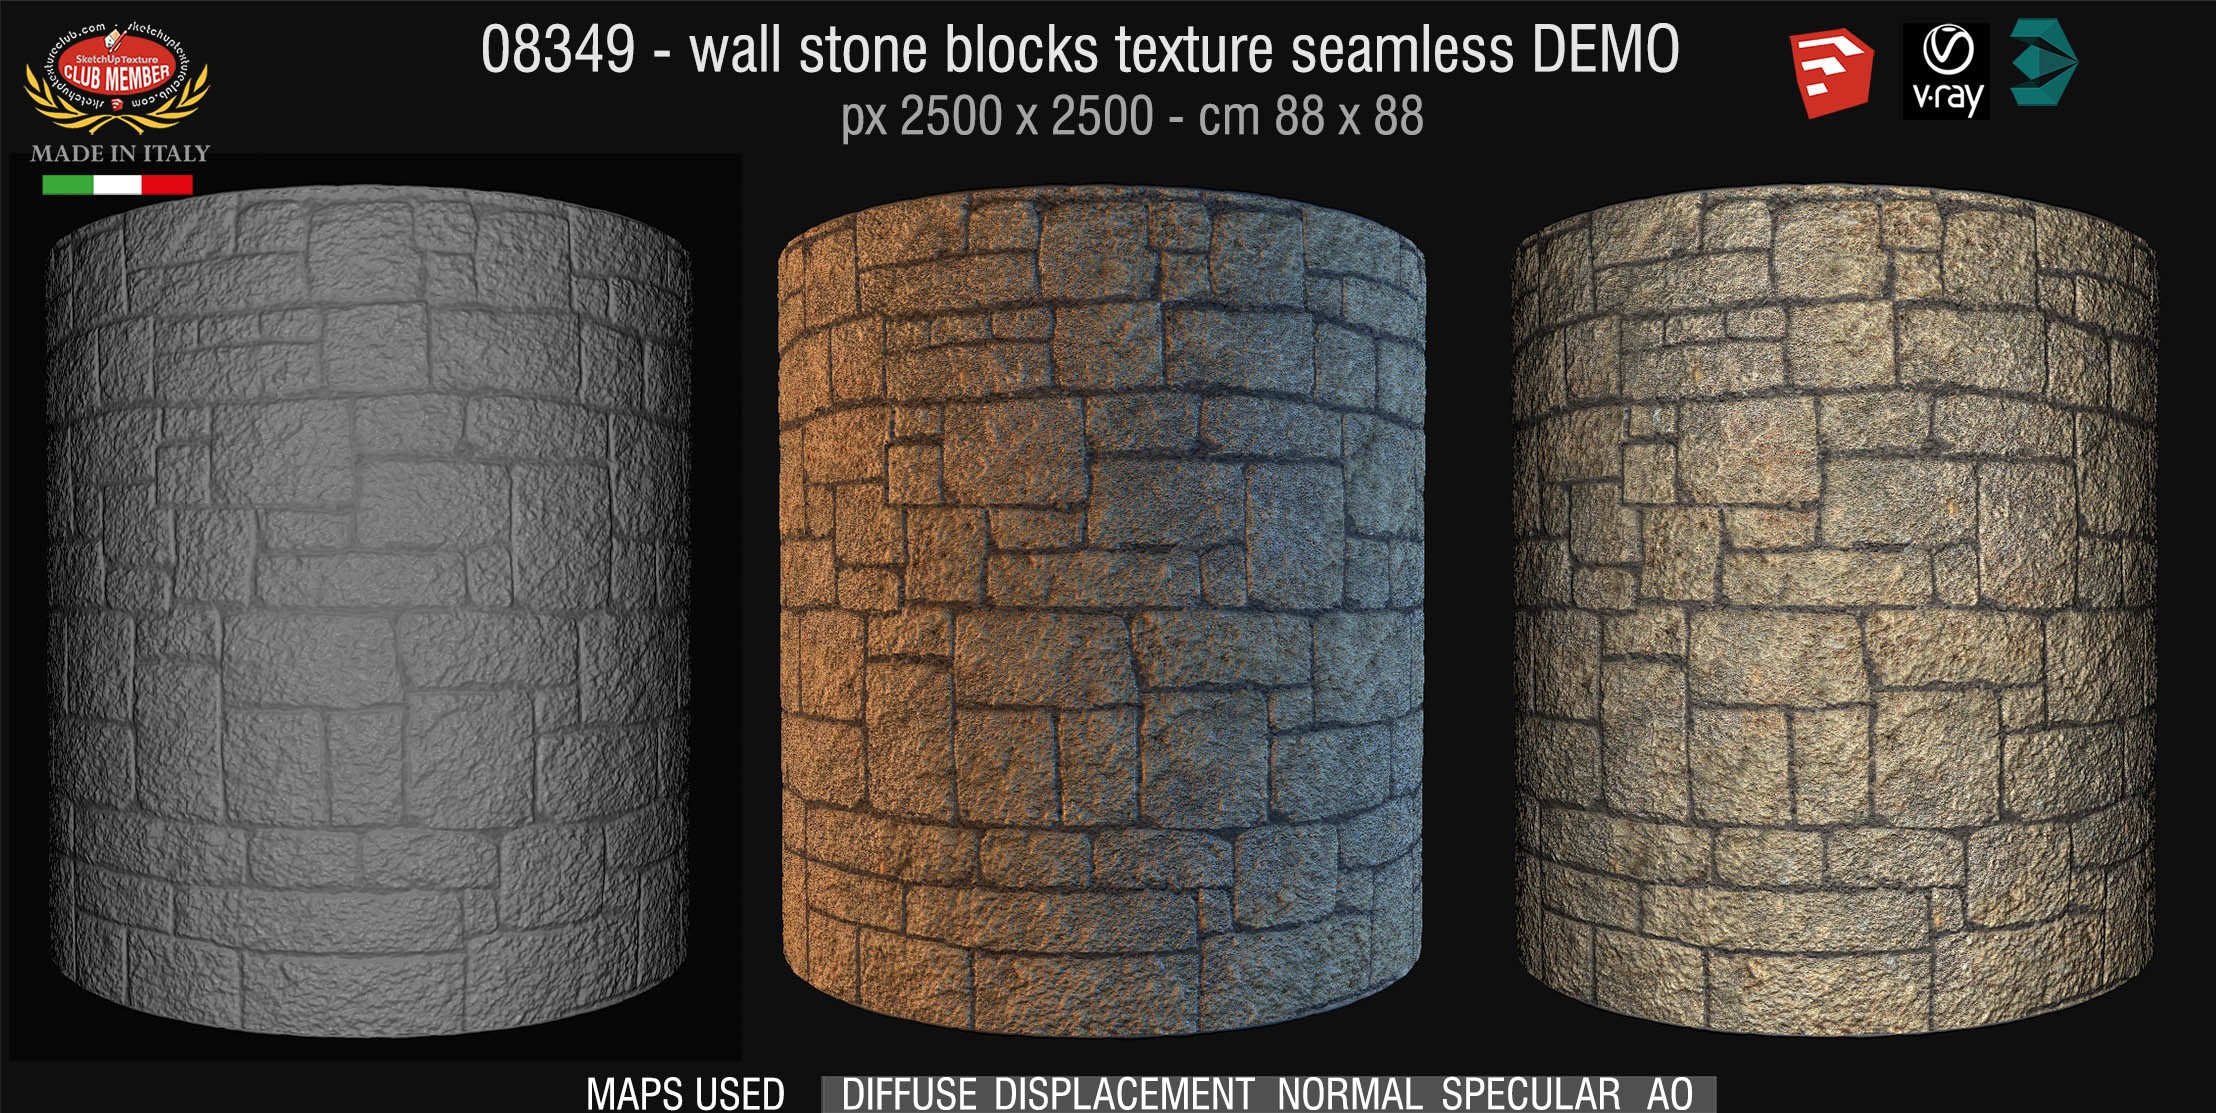 08349 HR Wall stone with regular blocks texture + maps DEMO